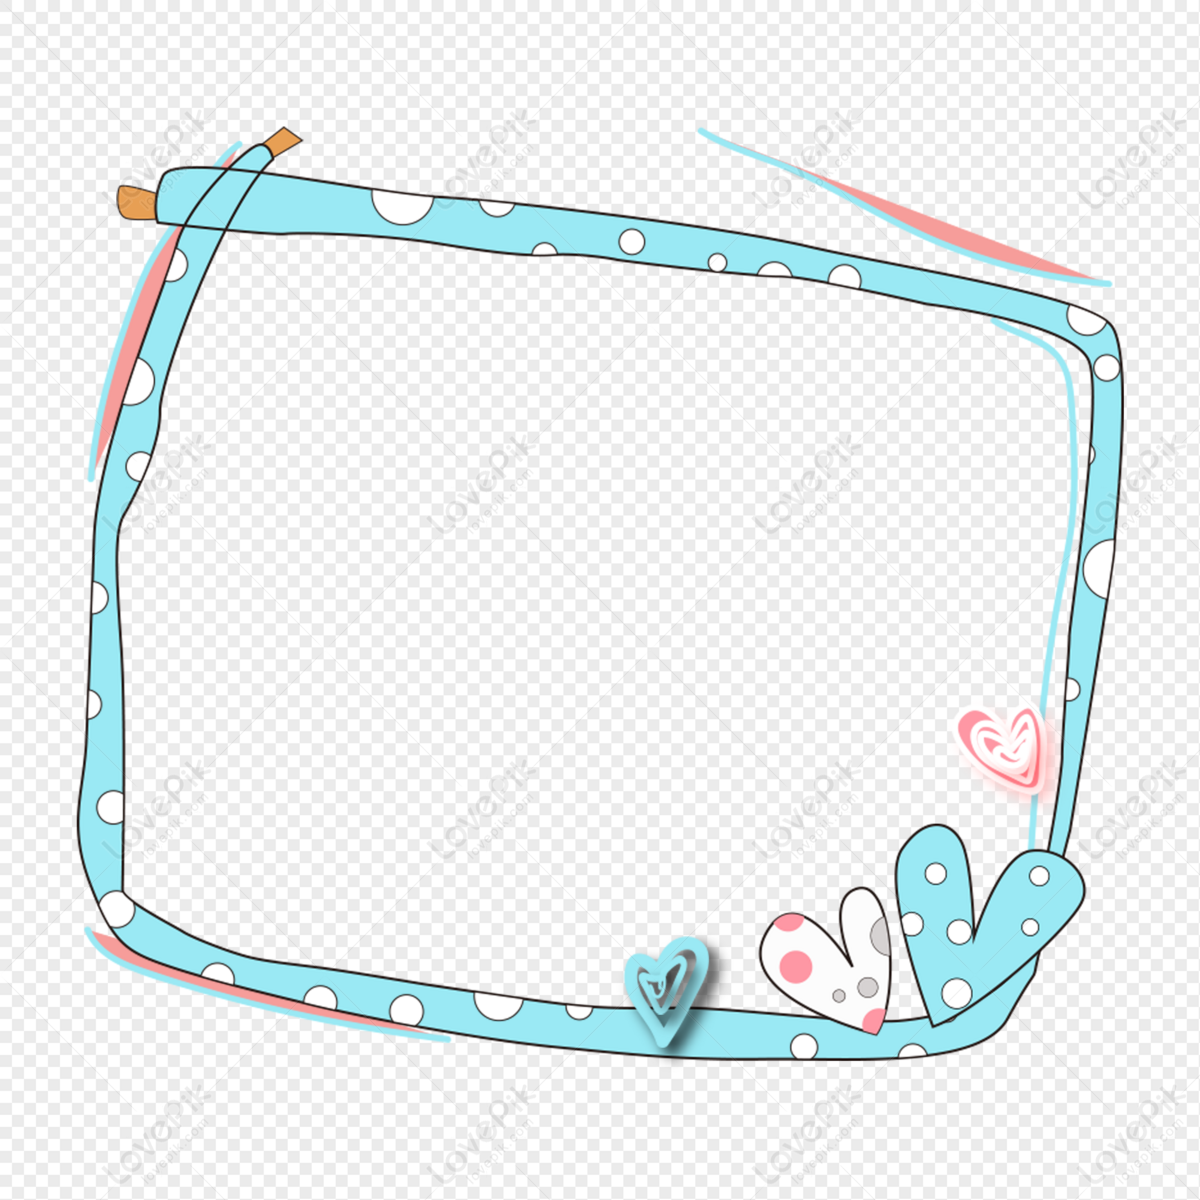 Cute Love Cartoon Lace Border Decorative Frame PNG White Transparent And  Clipart Image For Free Download - Lovepik | 401180402